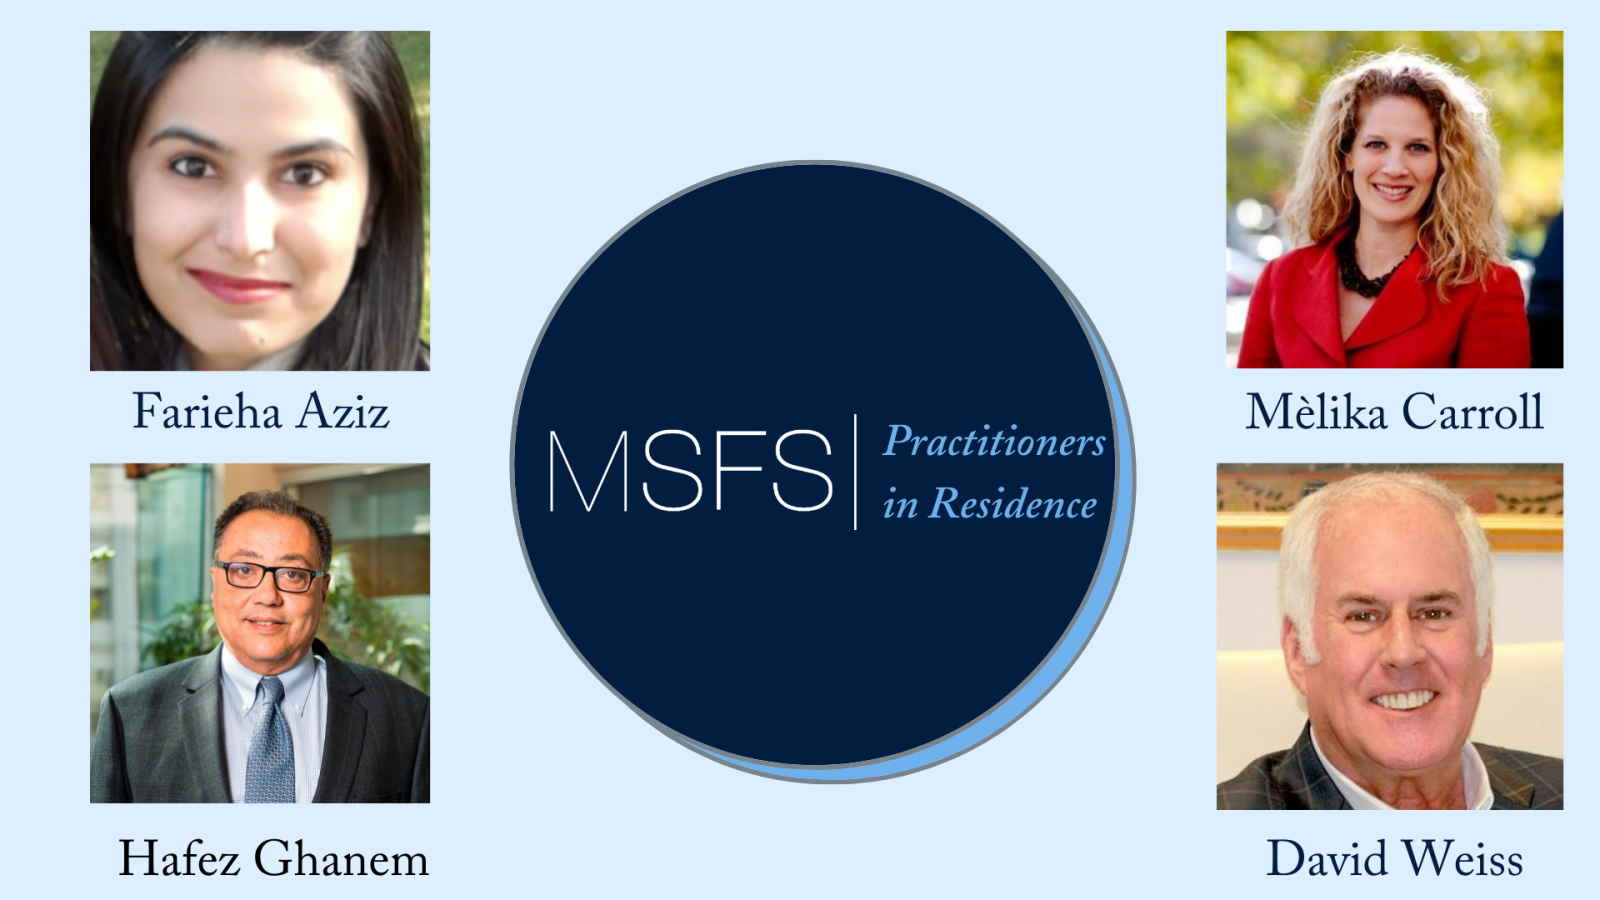 Headshots of Practitioners in Residence with their names and the MSFS logo.